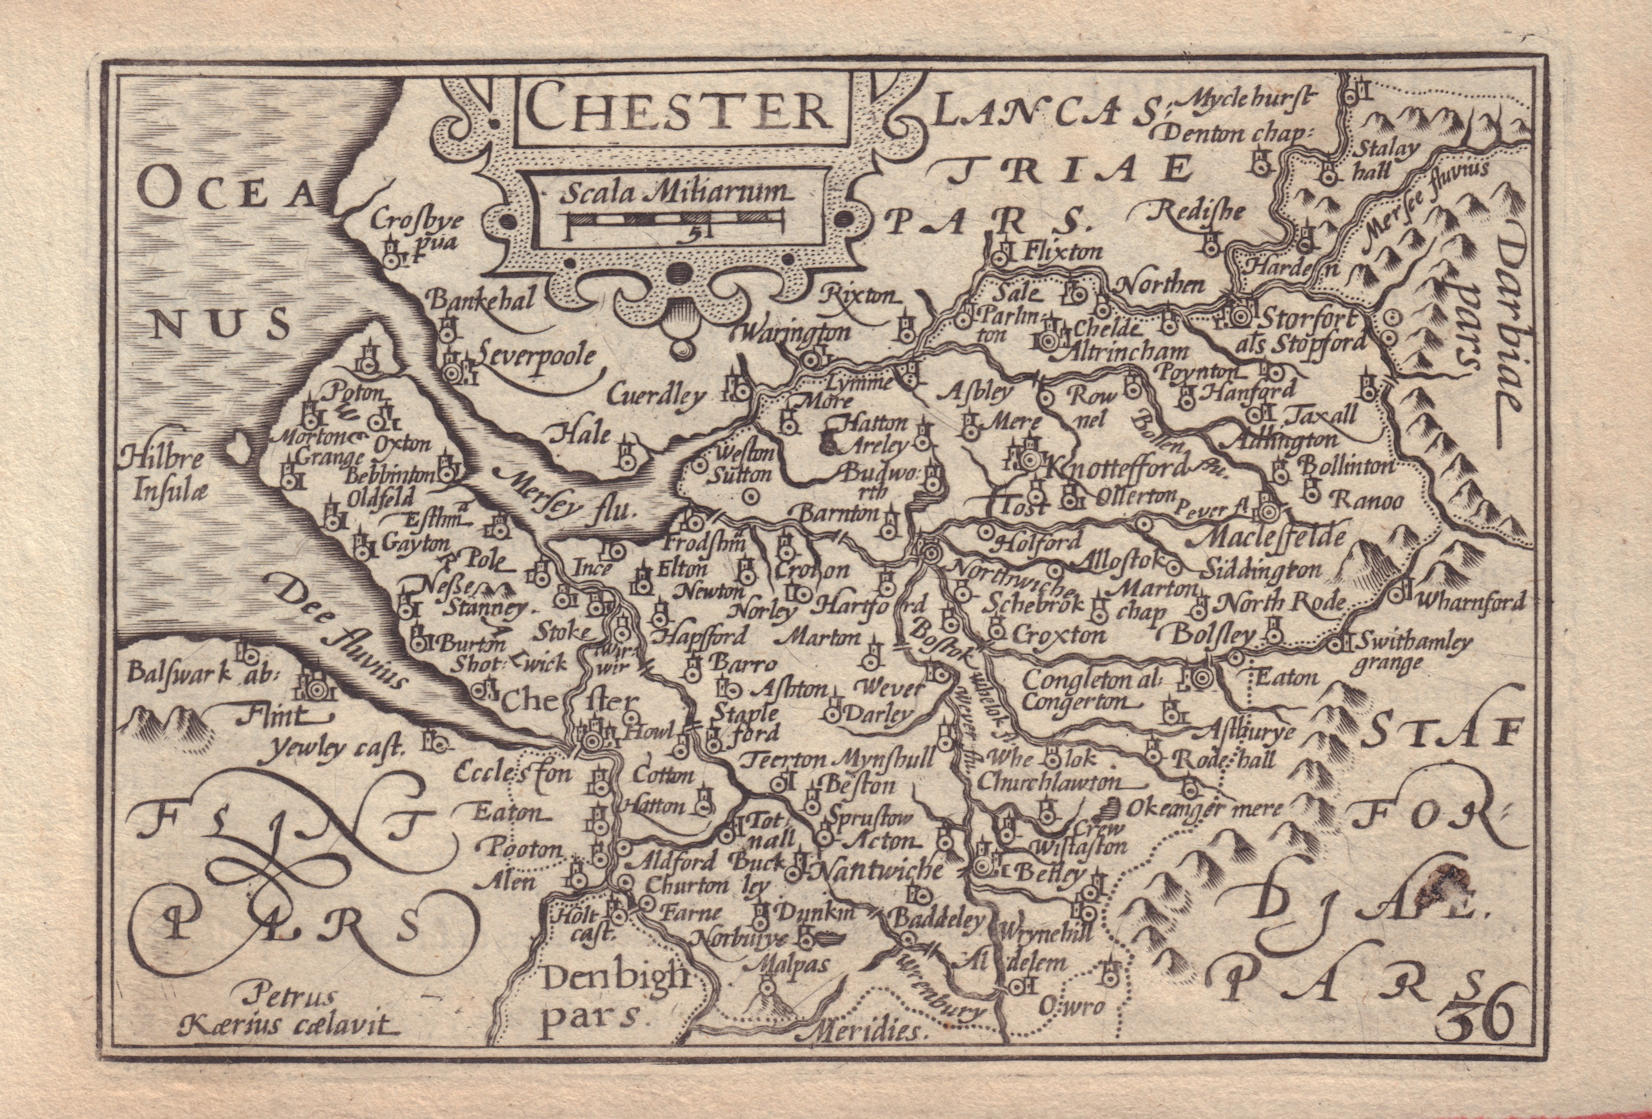 Associate Product Chester by van den Keere. "Speed miniature" Cheshire county map 1632 old